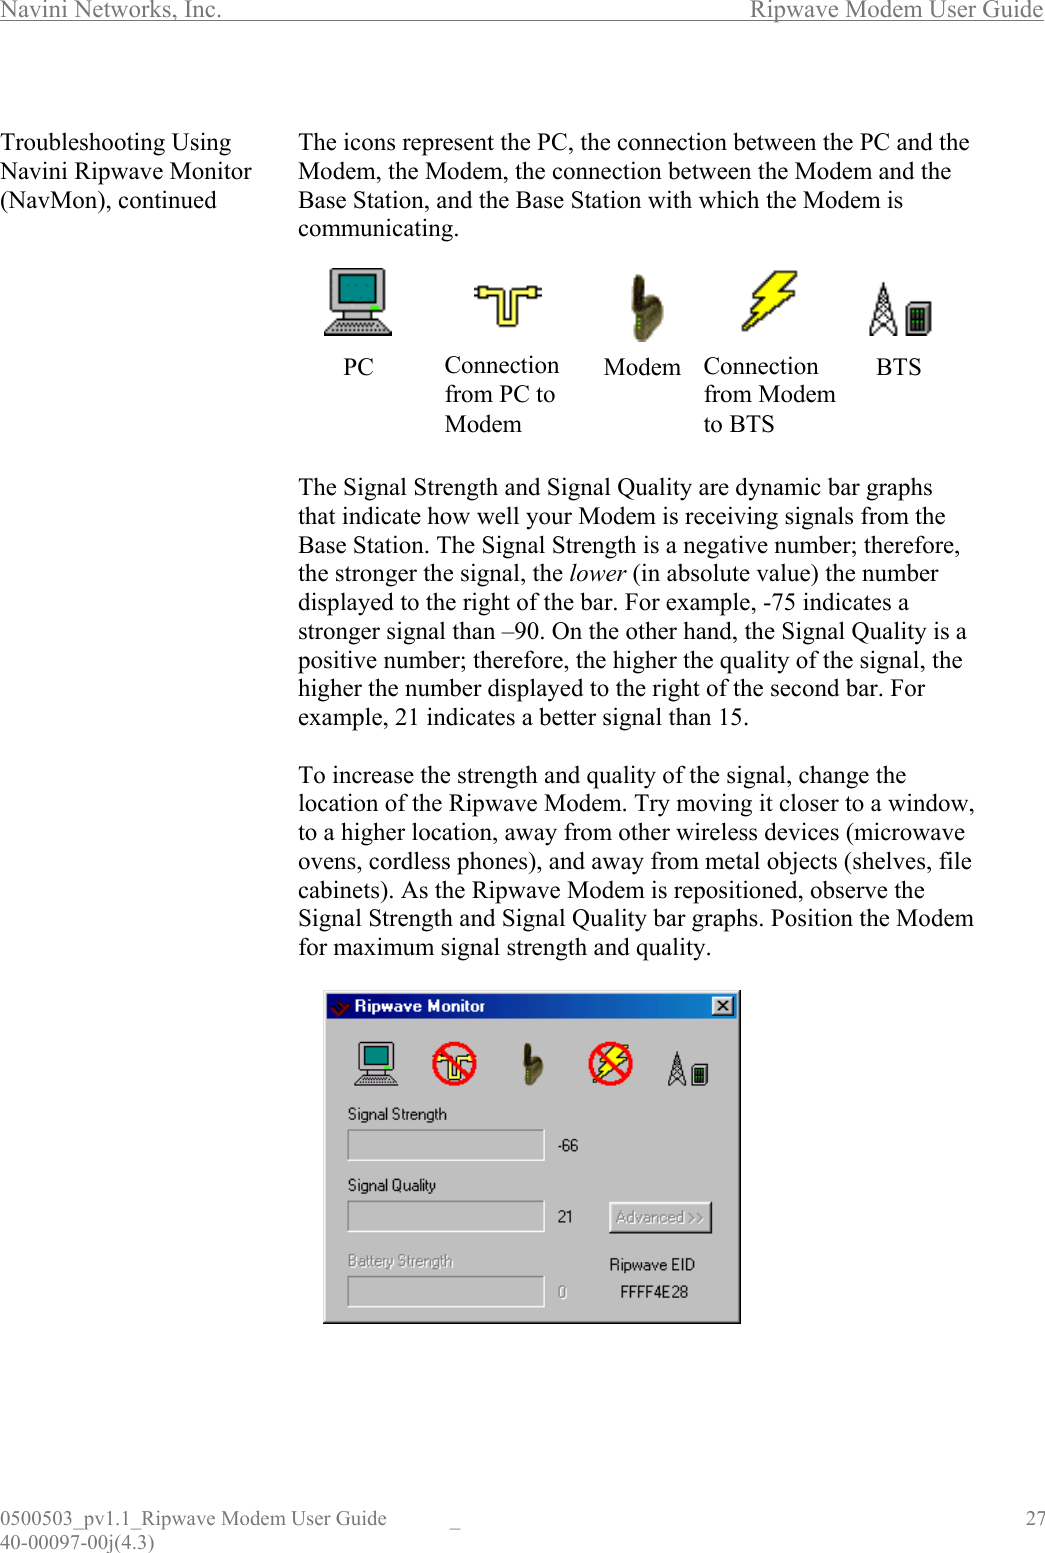 Navini Networks, Inc.        Ripwave Modem User Guide 0500503_pv1.1_Ripwave Modem User Guide  _                                    27 40-00097-00j(4.3)  Troubleshooting Using Navini Ripwave Monitor (NavMon), continued                                            The icons represent the PC, the connection between the PC and the Modem, the Modem, the connection between the Modem and the Base Station, and the Base Station with which the Modem is communicating.         The Signal Strength and Signal Quality are dynamic bar graphs that indicate how well your Modem is receiving signals from the Base Station. The Signal Strength is a negative number; therefore, the stronger the signal, the lower (in absolute value) the number displayed to the right of the bar. For example, -75 indicates a stronger signal than –90. On the other hand, the Signal Quality is a positive number; therefore, the higher the quality of the signal, the higher the number displayed to the right of the second bar. For example, 21 indicates a better signal than 15.  To increase the strength and quality of the signal, change the location of the Ripwave Modem. Try moving it closer to a window, to a higher location, away from other wireless devices (microwave ovens, cordless phones), and away from metal objects (shelves, file cabinets). As the Ripwave Modem is repositioned, observe the Signal Strength and Signal Quality bar graphs. Position the Modem for maximum signal strength and quality.              PC BTSConnectionfrom PC to Modem Modem  Connection from Modem to BTS 